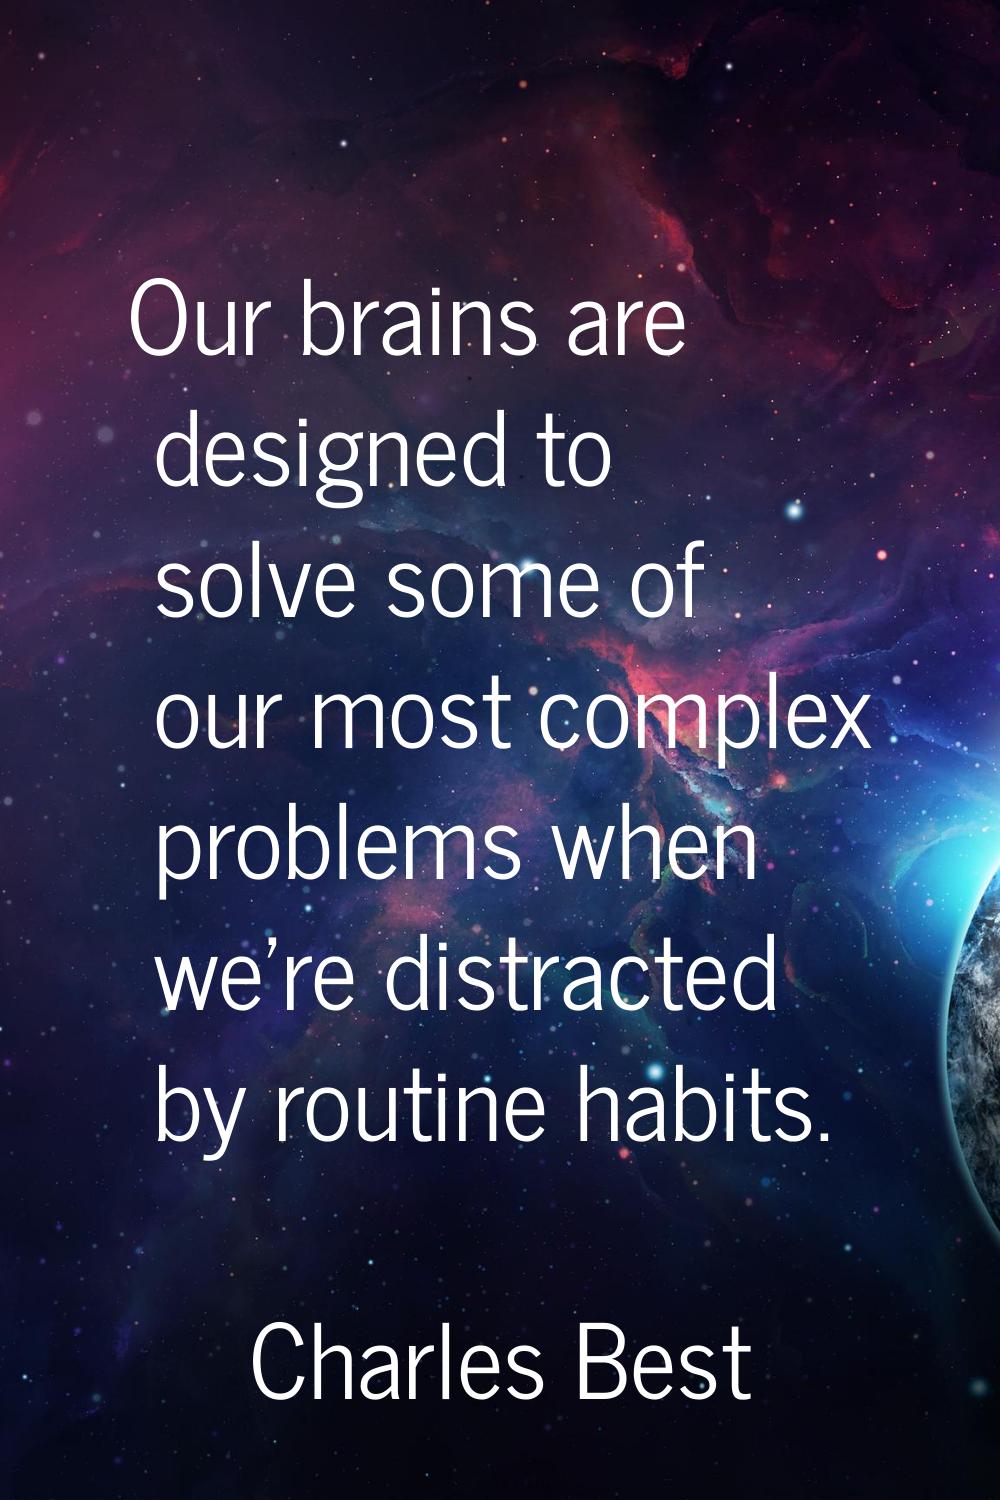 Our brains are designed to solve some of our most complex problems when we're distracted by routine